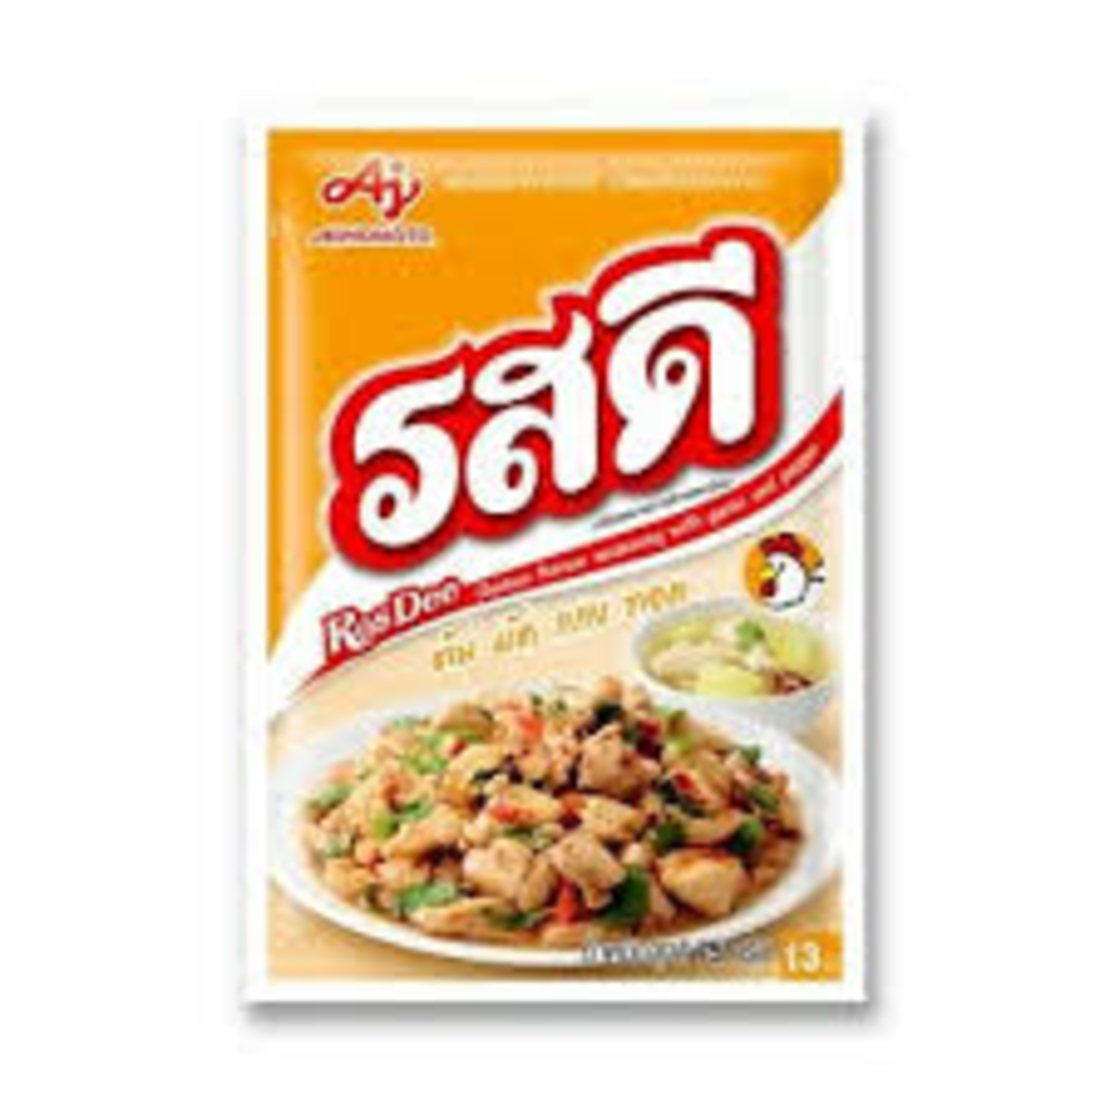 Ros Dee - Chicken Flavour Seasoining With Garlic and Pepper 75g